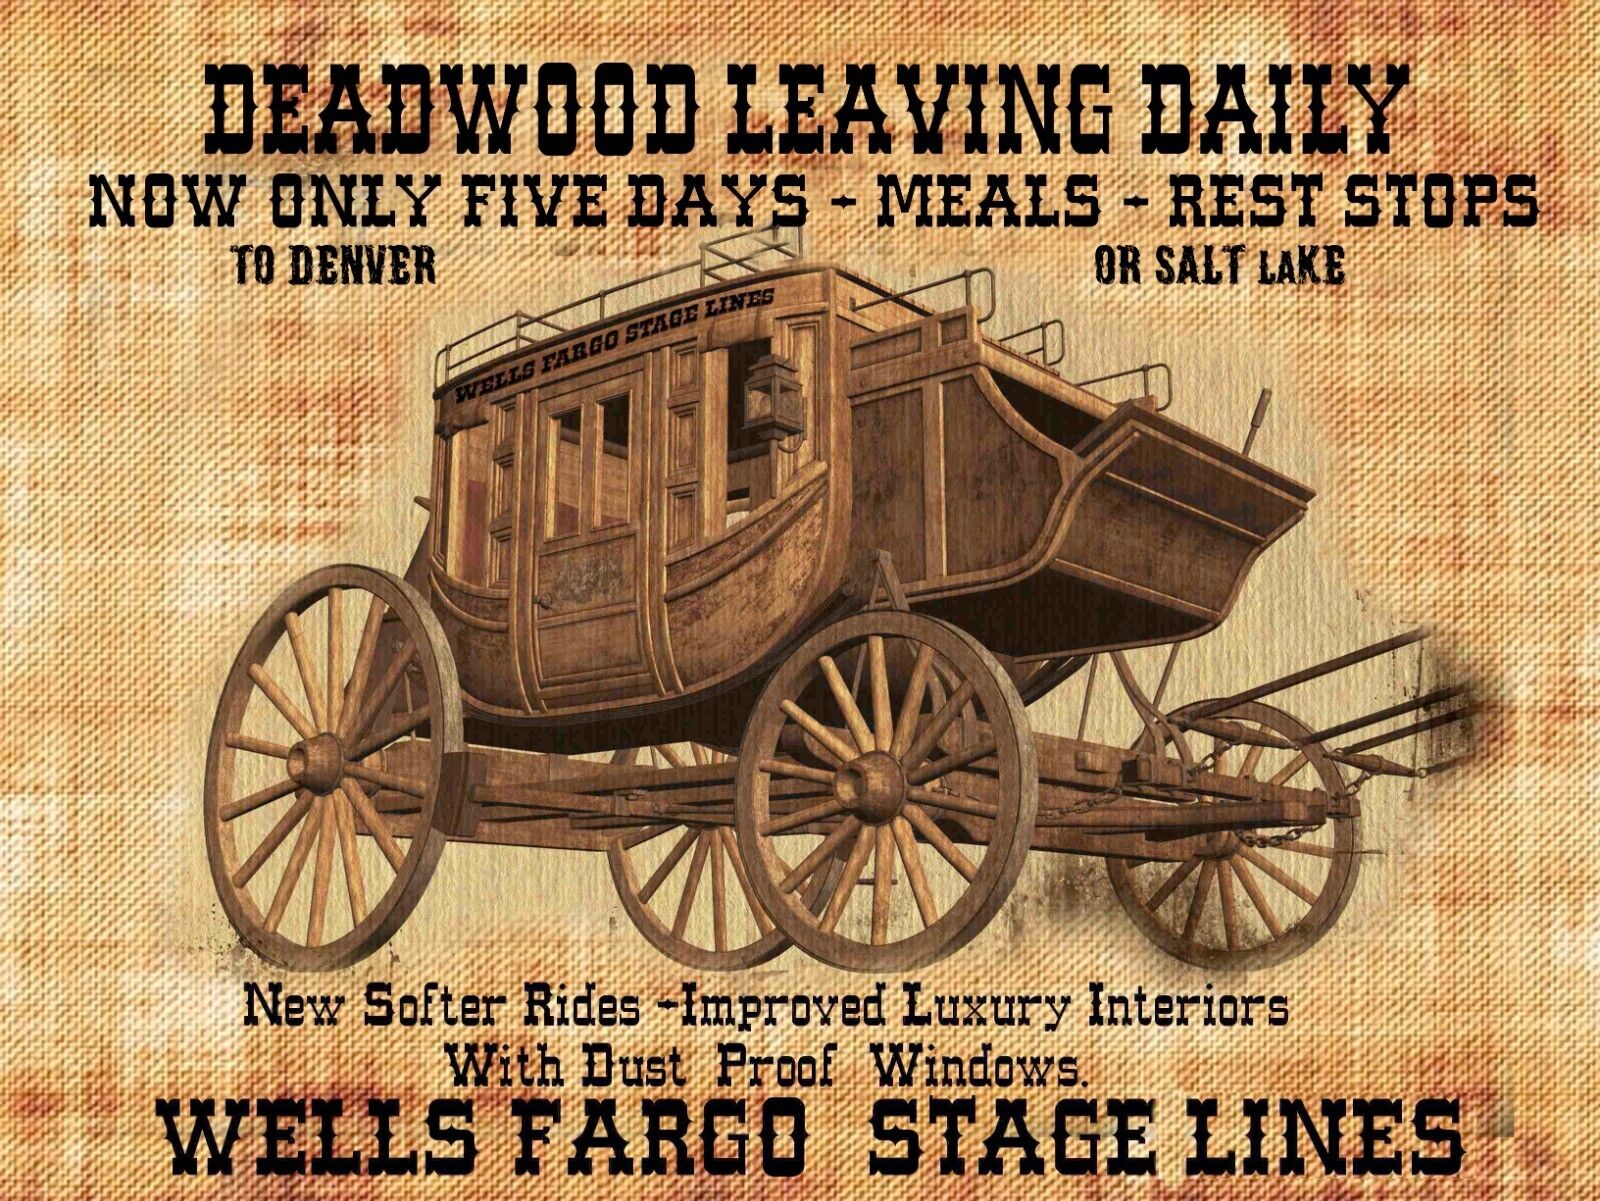 Old West Wells Fargo Stage lines Deadwood SD Daily Trips Mouse Pad   7 3/4  x 9\